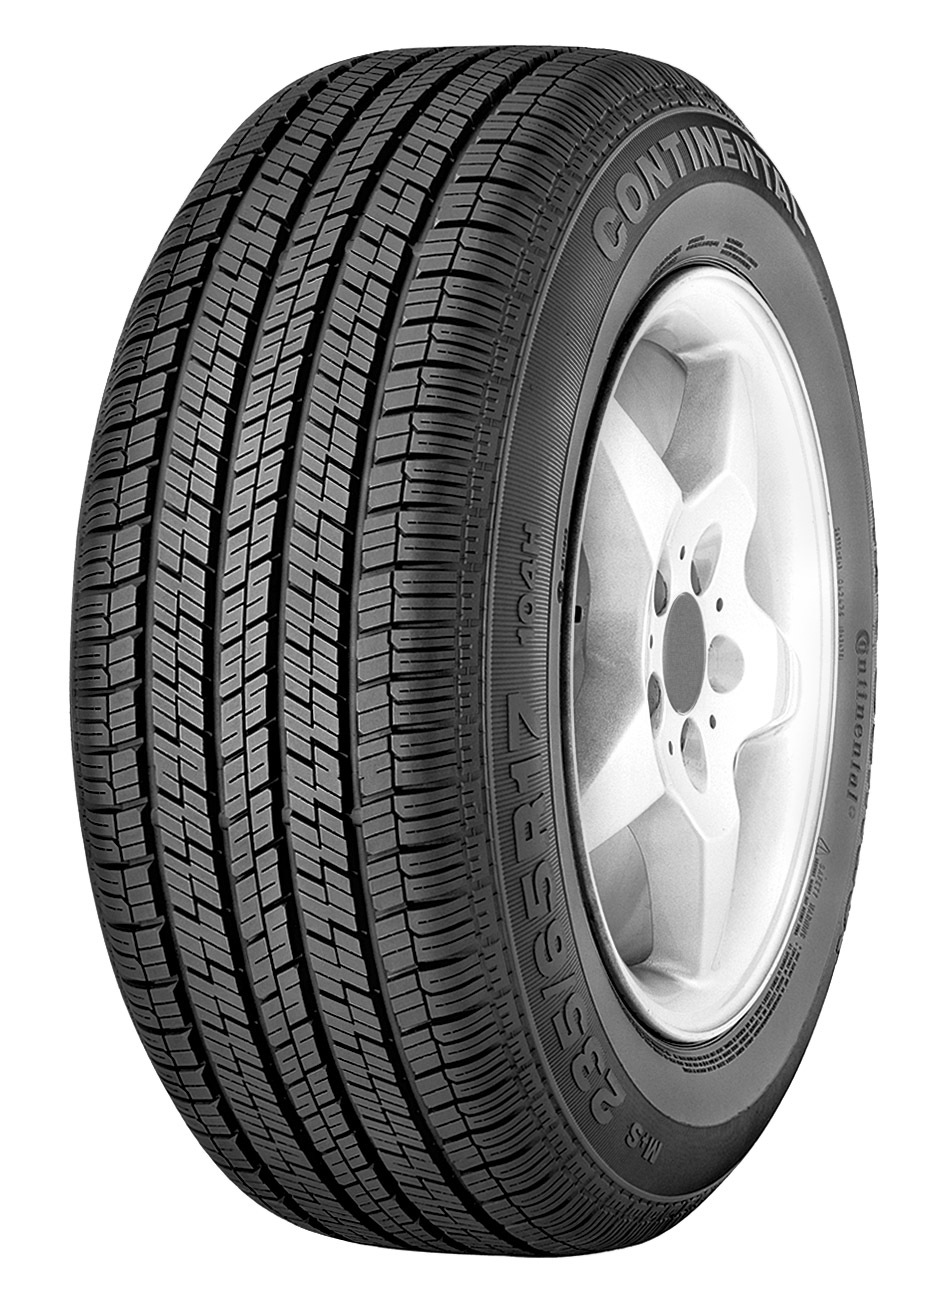 225/70 R 16 102H 4X4CONTACT m+s TL